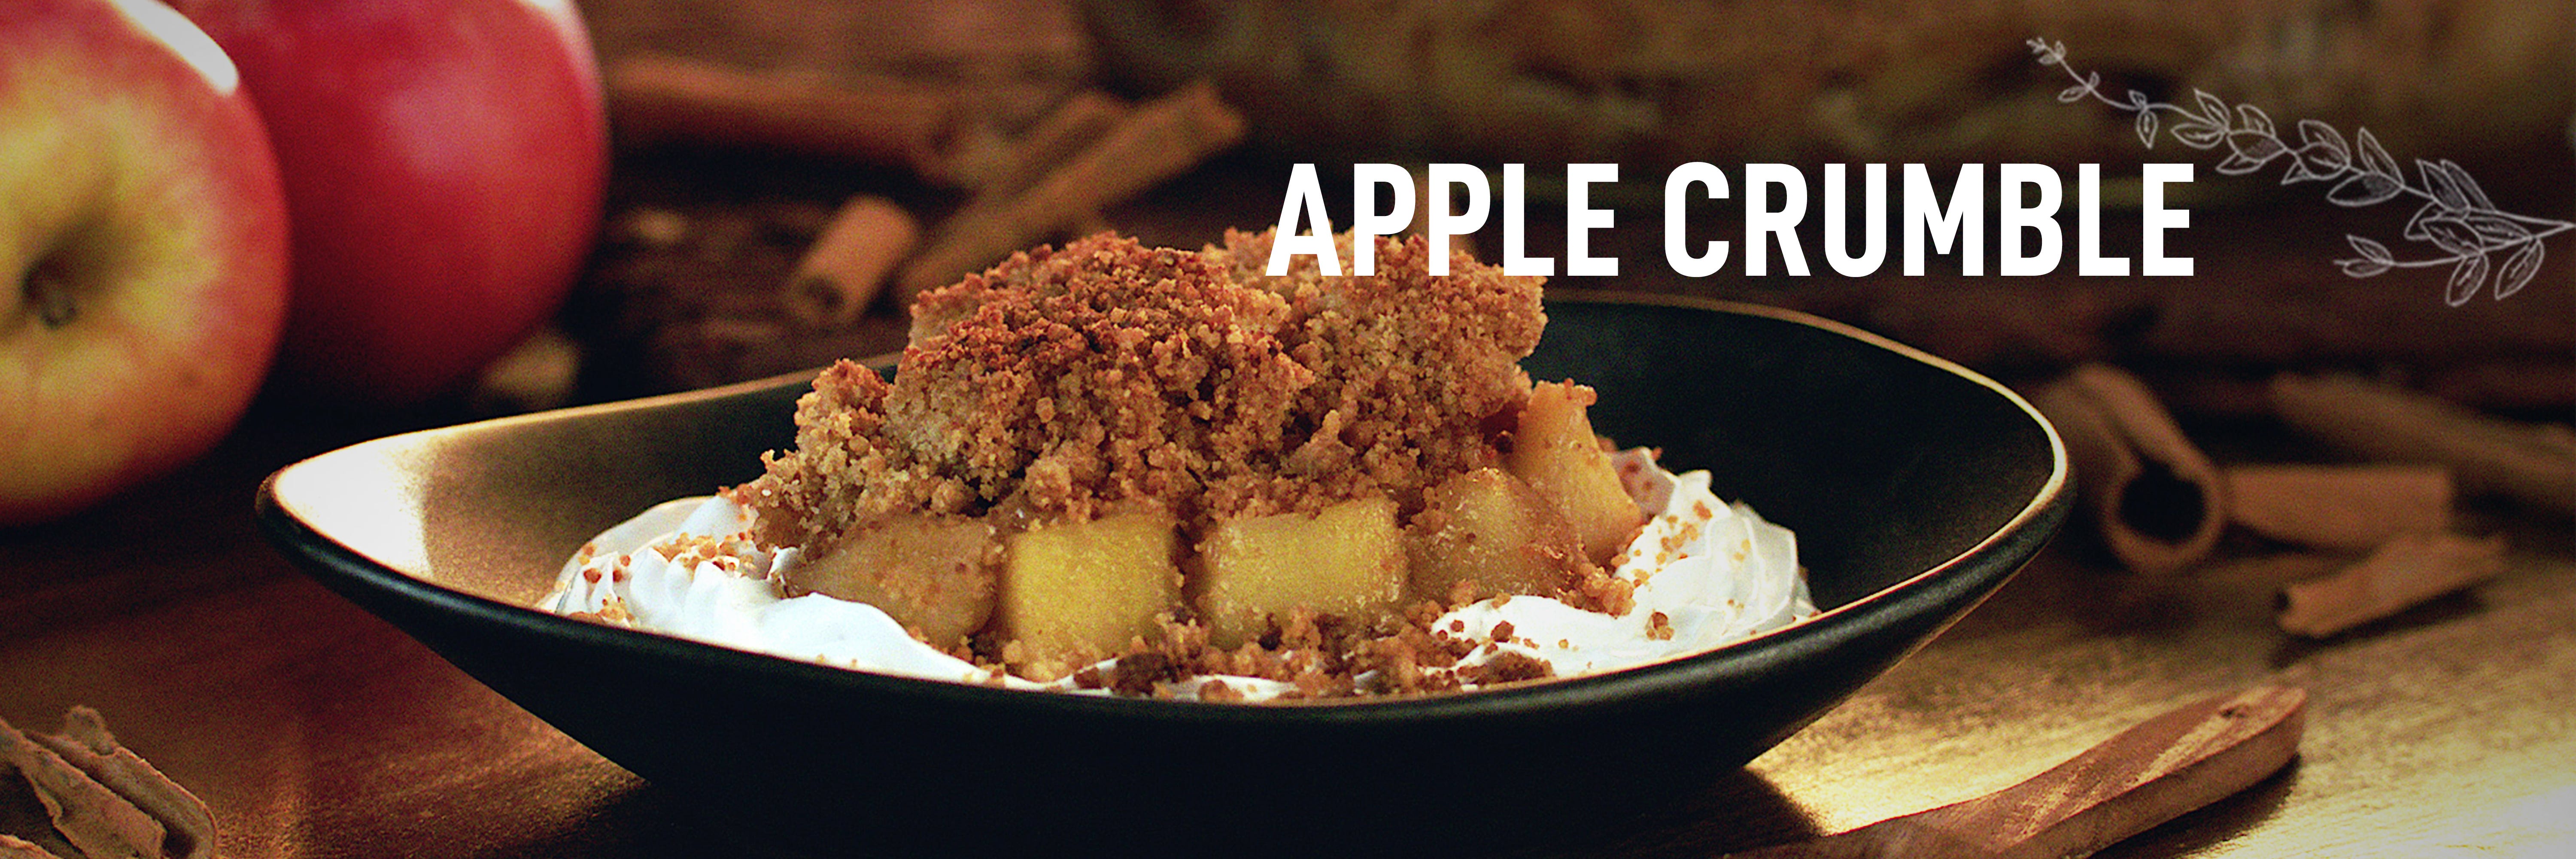 Apple Crumble in Microwave